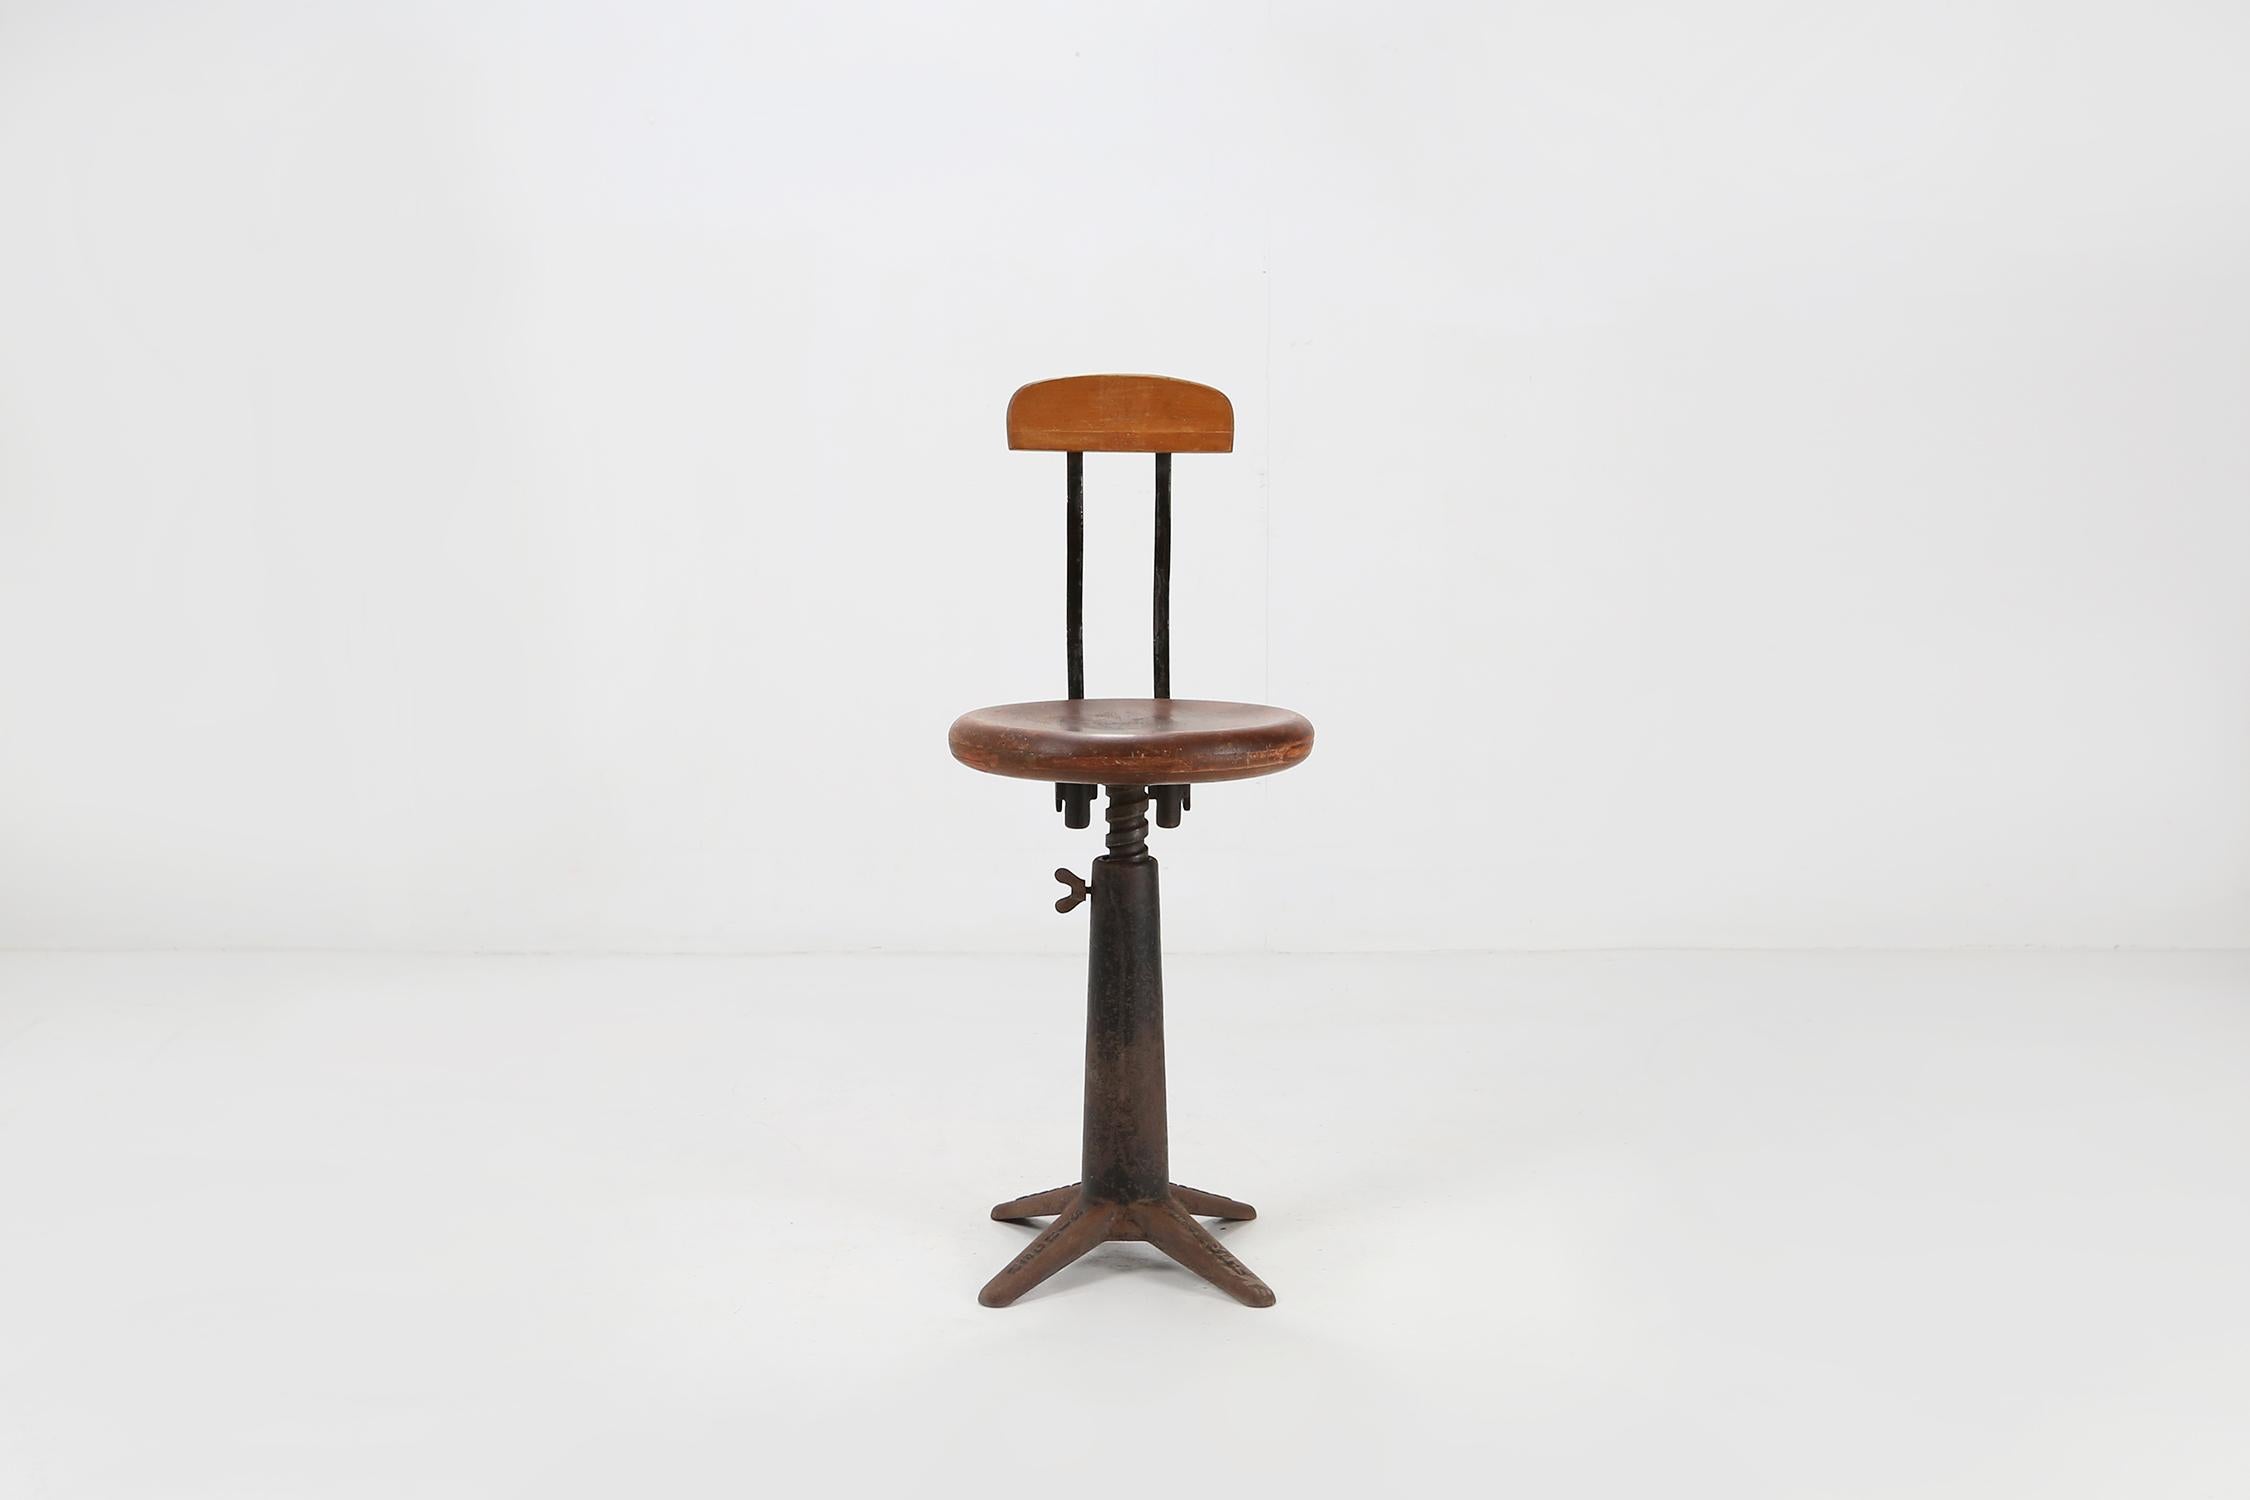 Industrial stool of the Singer Sewing Machine Company.
Made of a cast iron base whit a solid wooden seat that can be adjust in height with a screw.

The company brand in the base gives the stool a unique look.

Seat height: 45-64 cm.